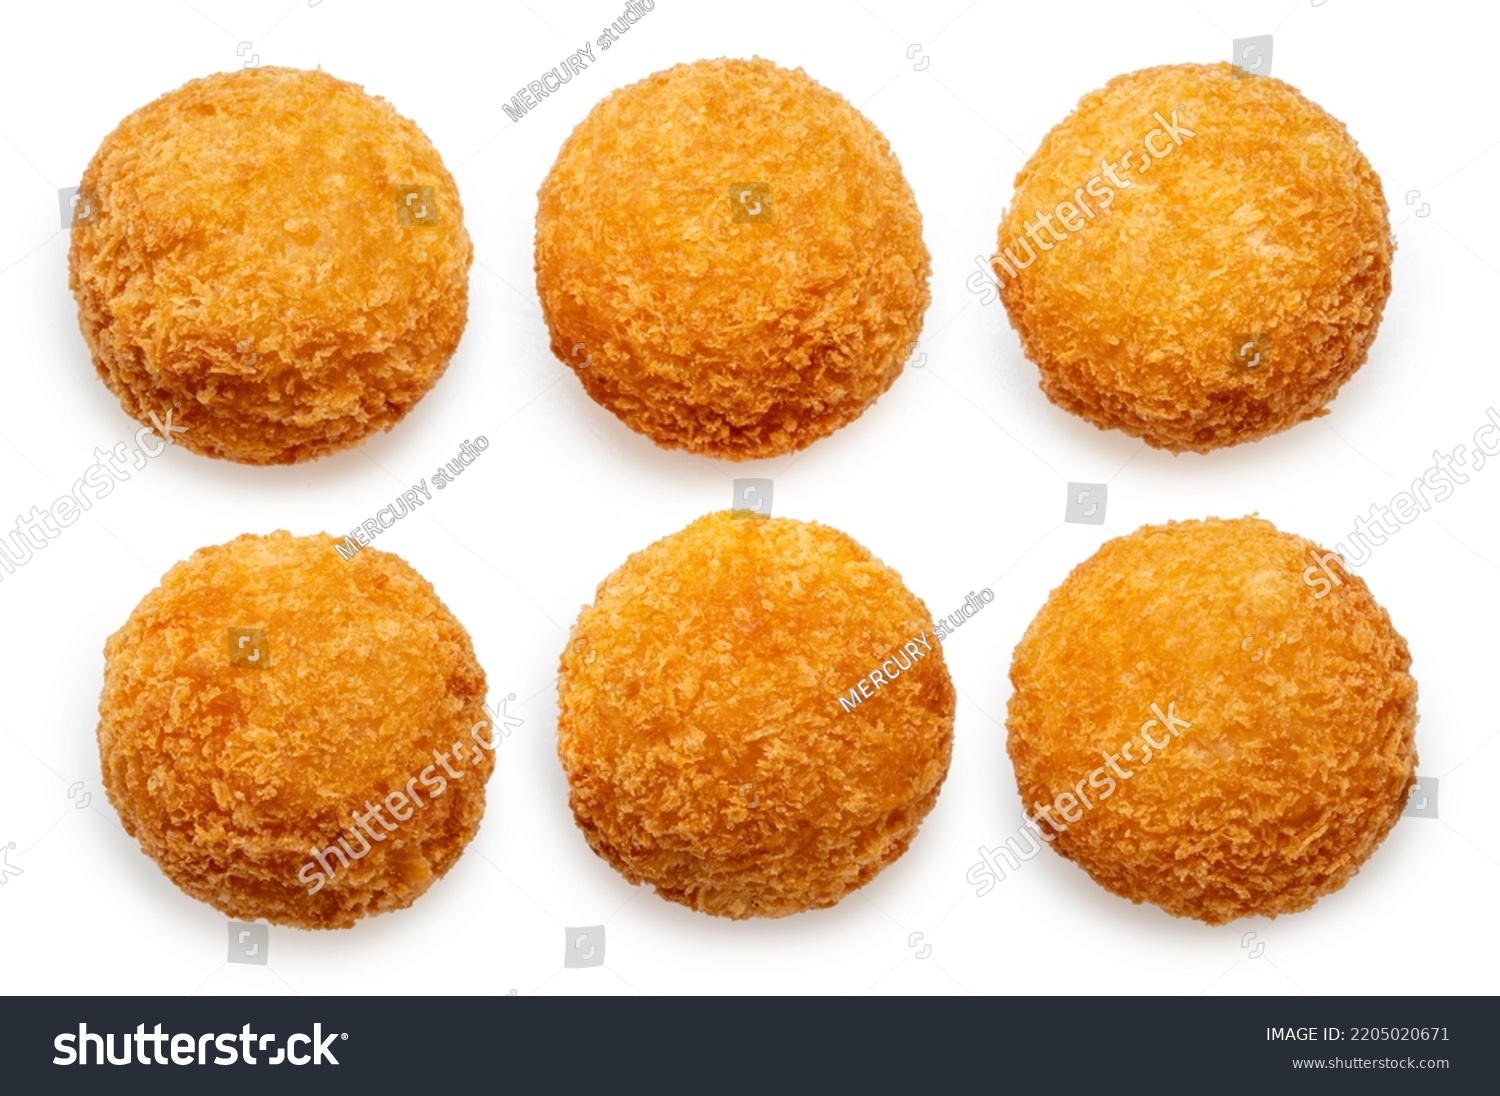 Delicious crispy Cheese ball isolated on white background, Cheese ball or cheesy puffs on white With clipping path. #2205020671